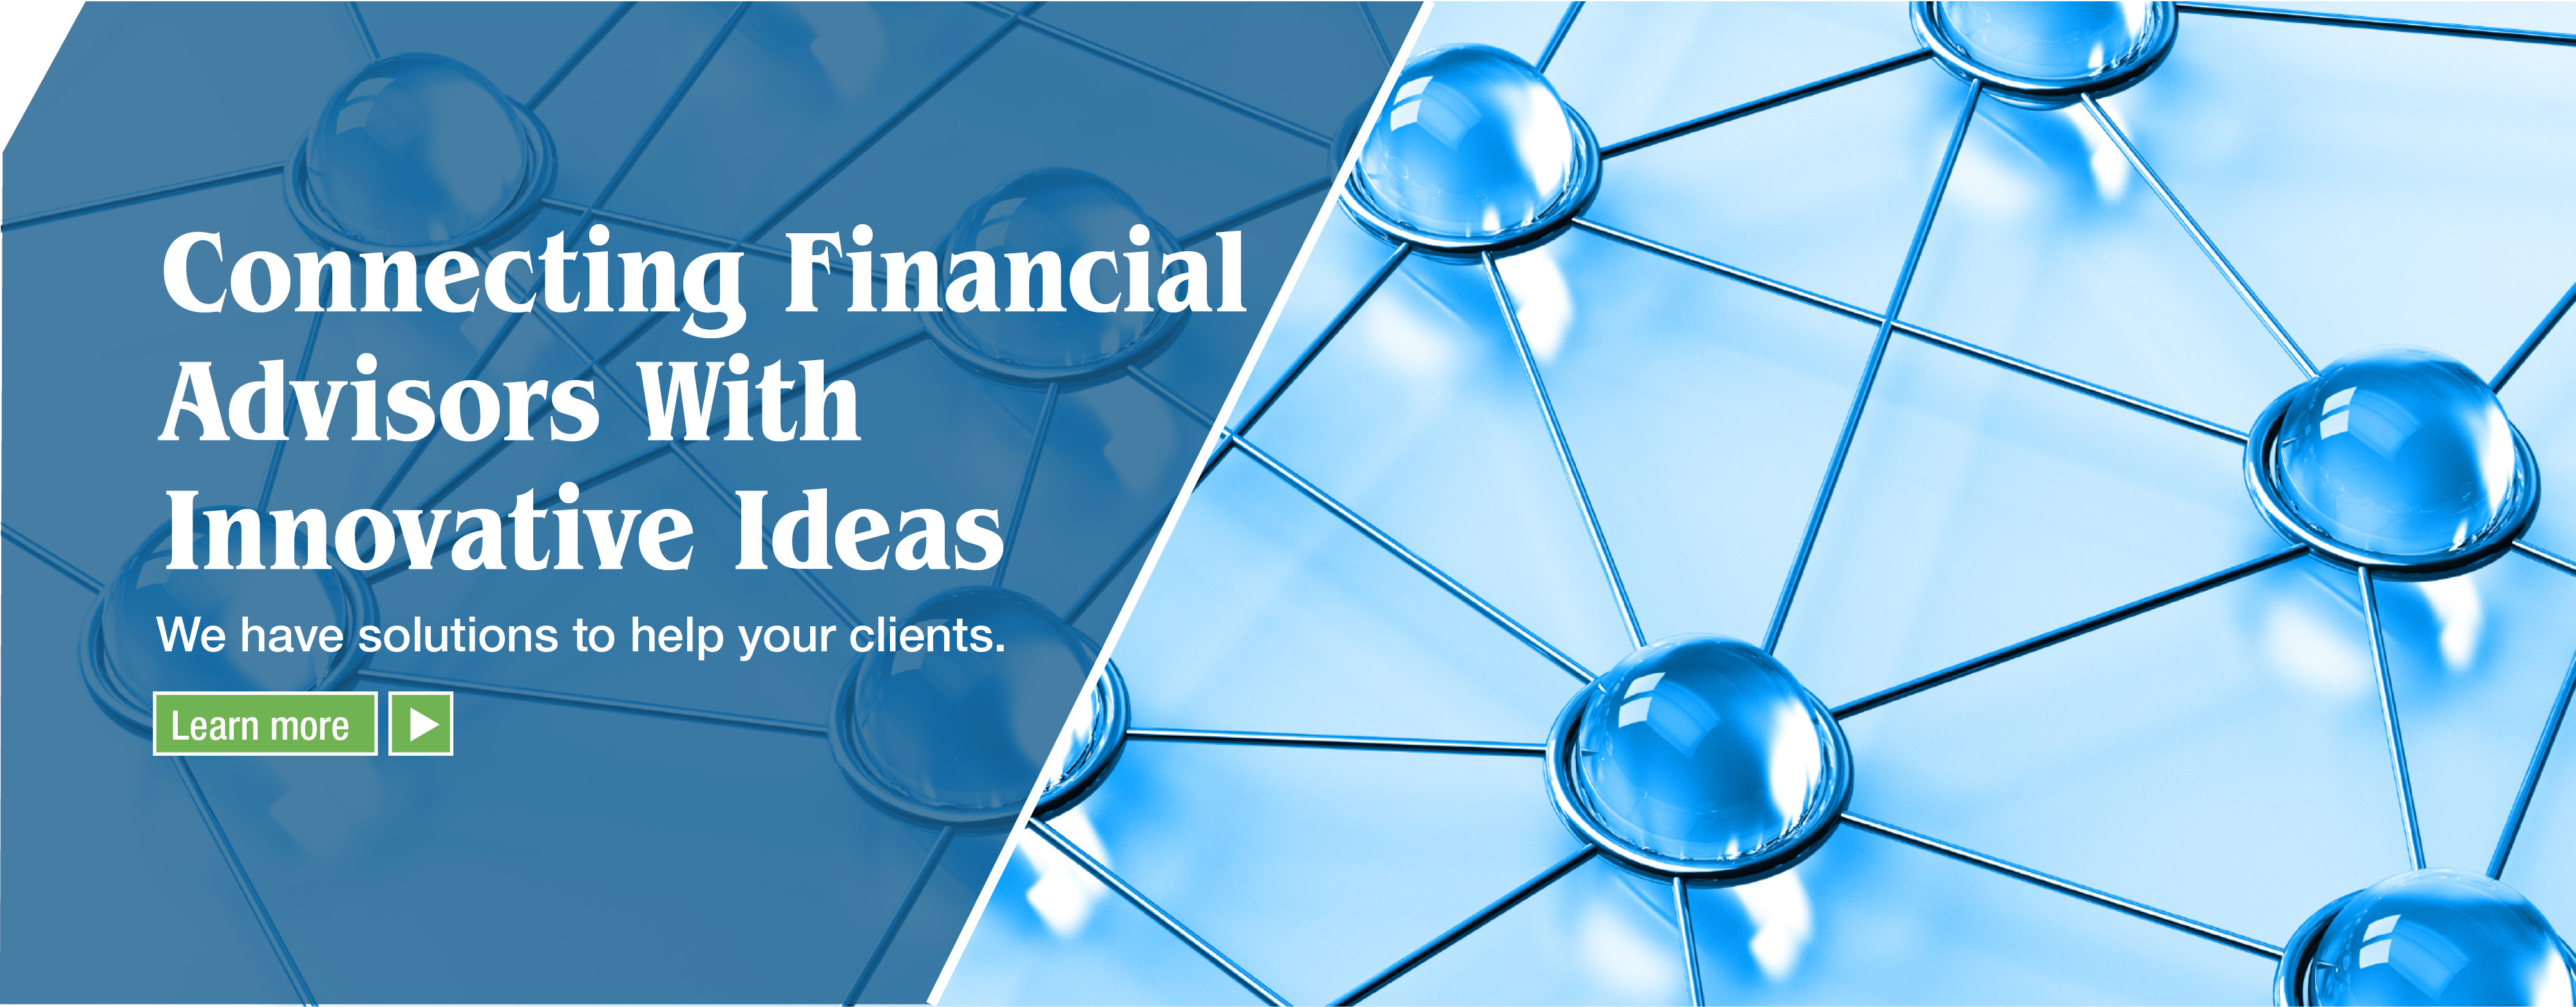 Connecting Financial Advisors with Innovative Ideas: We have solutions to help your clients. Find out more.